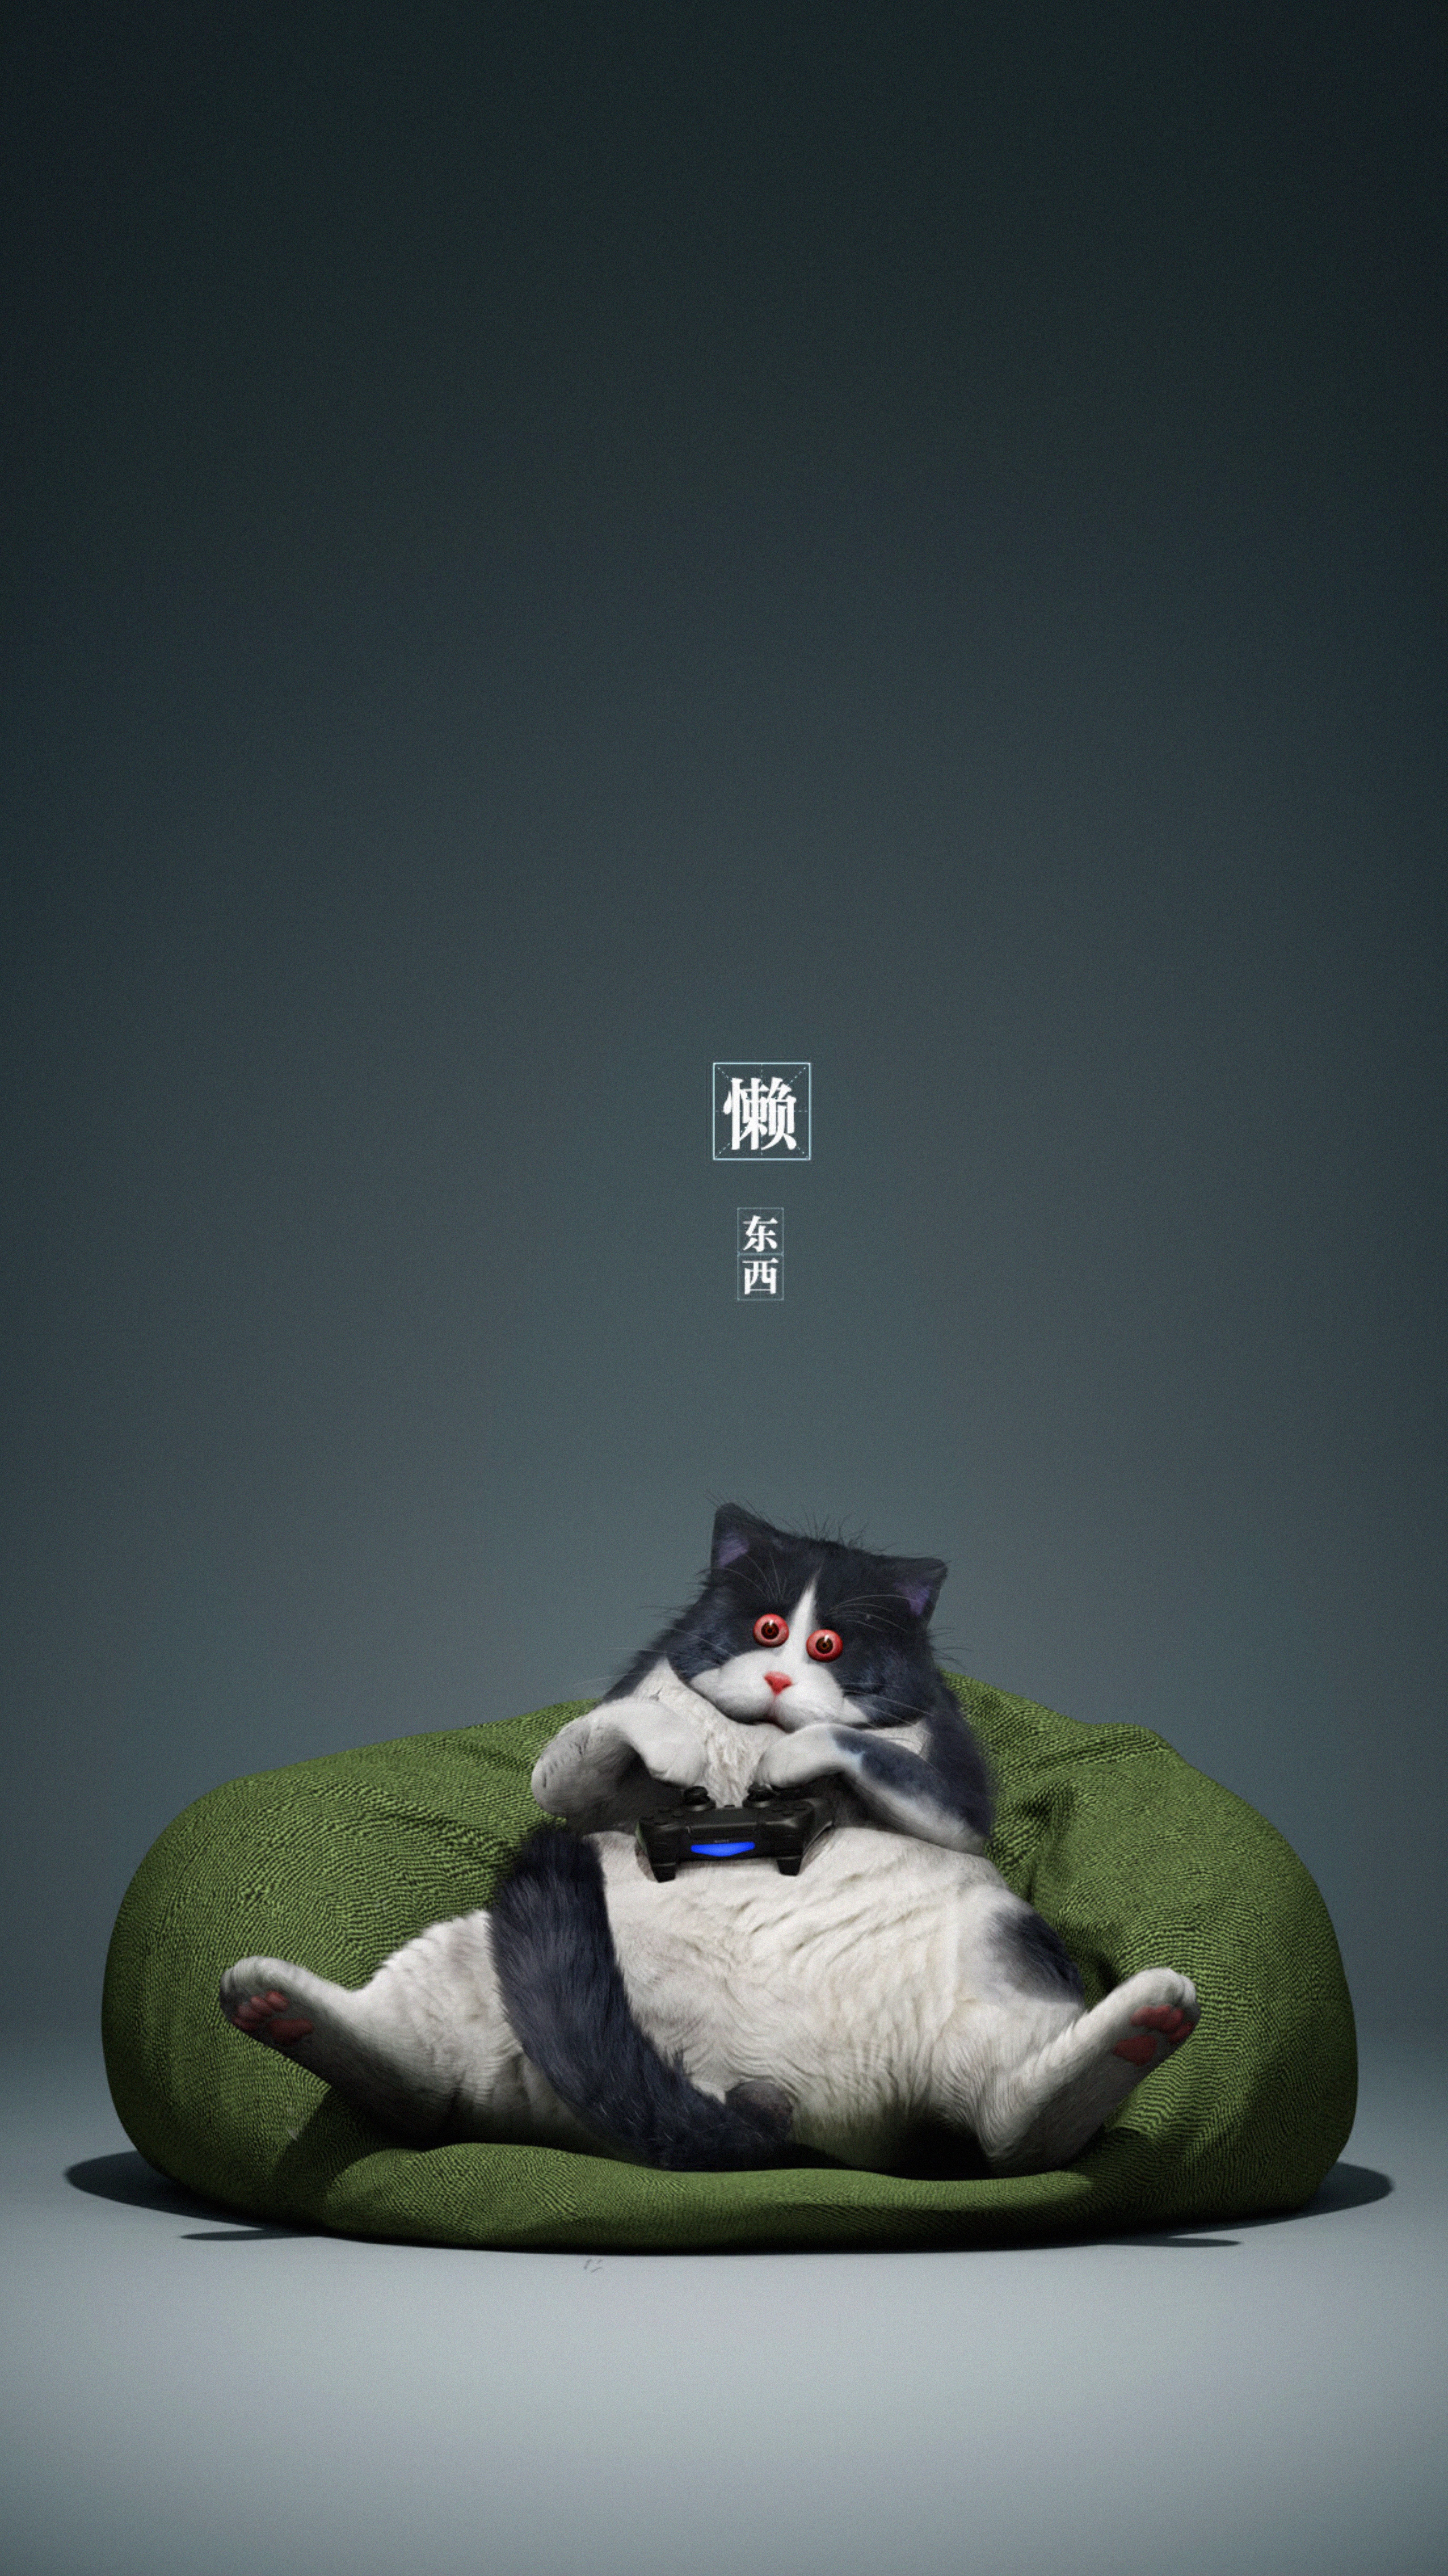 73422 download wallpaper funny, cat, gamer, miscellanea, miscellaneous, cool, controller, gamepad screensavers and pictures for free